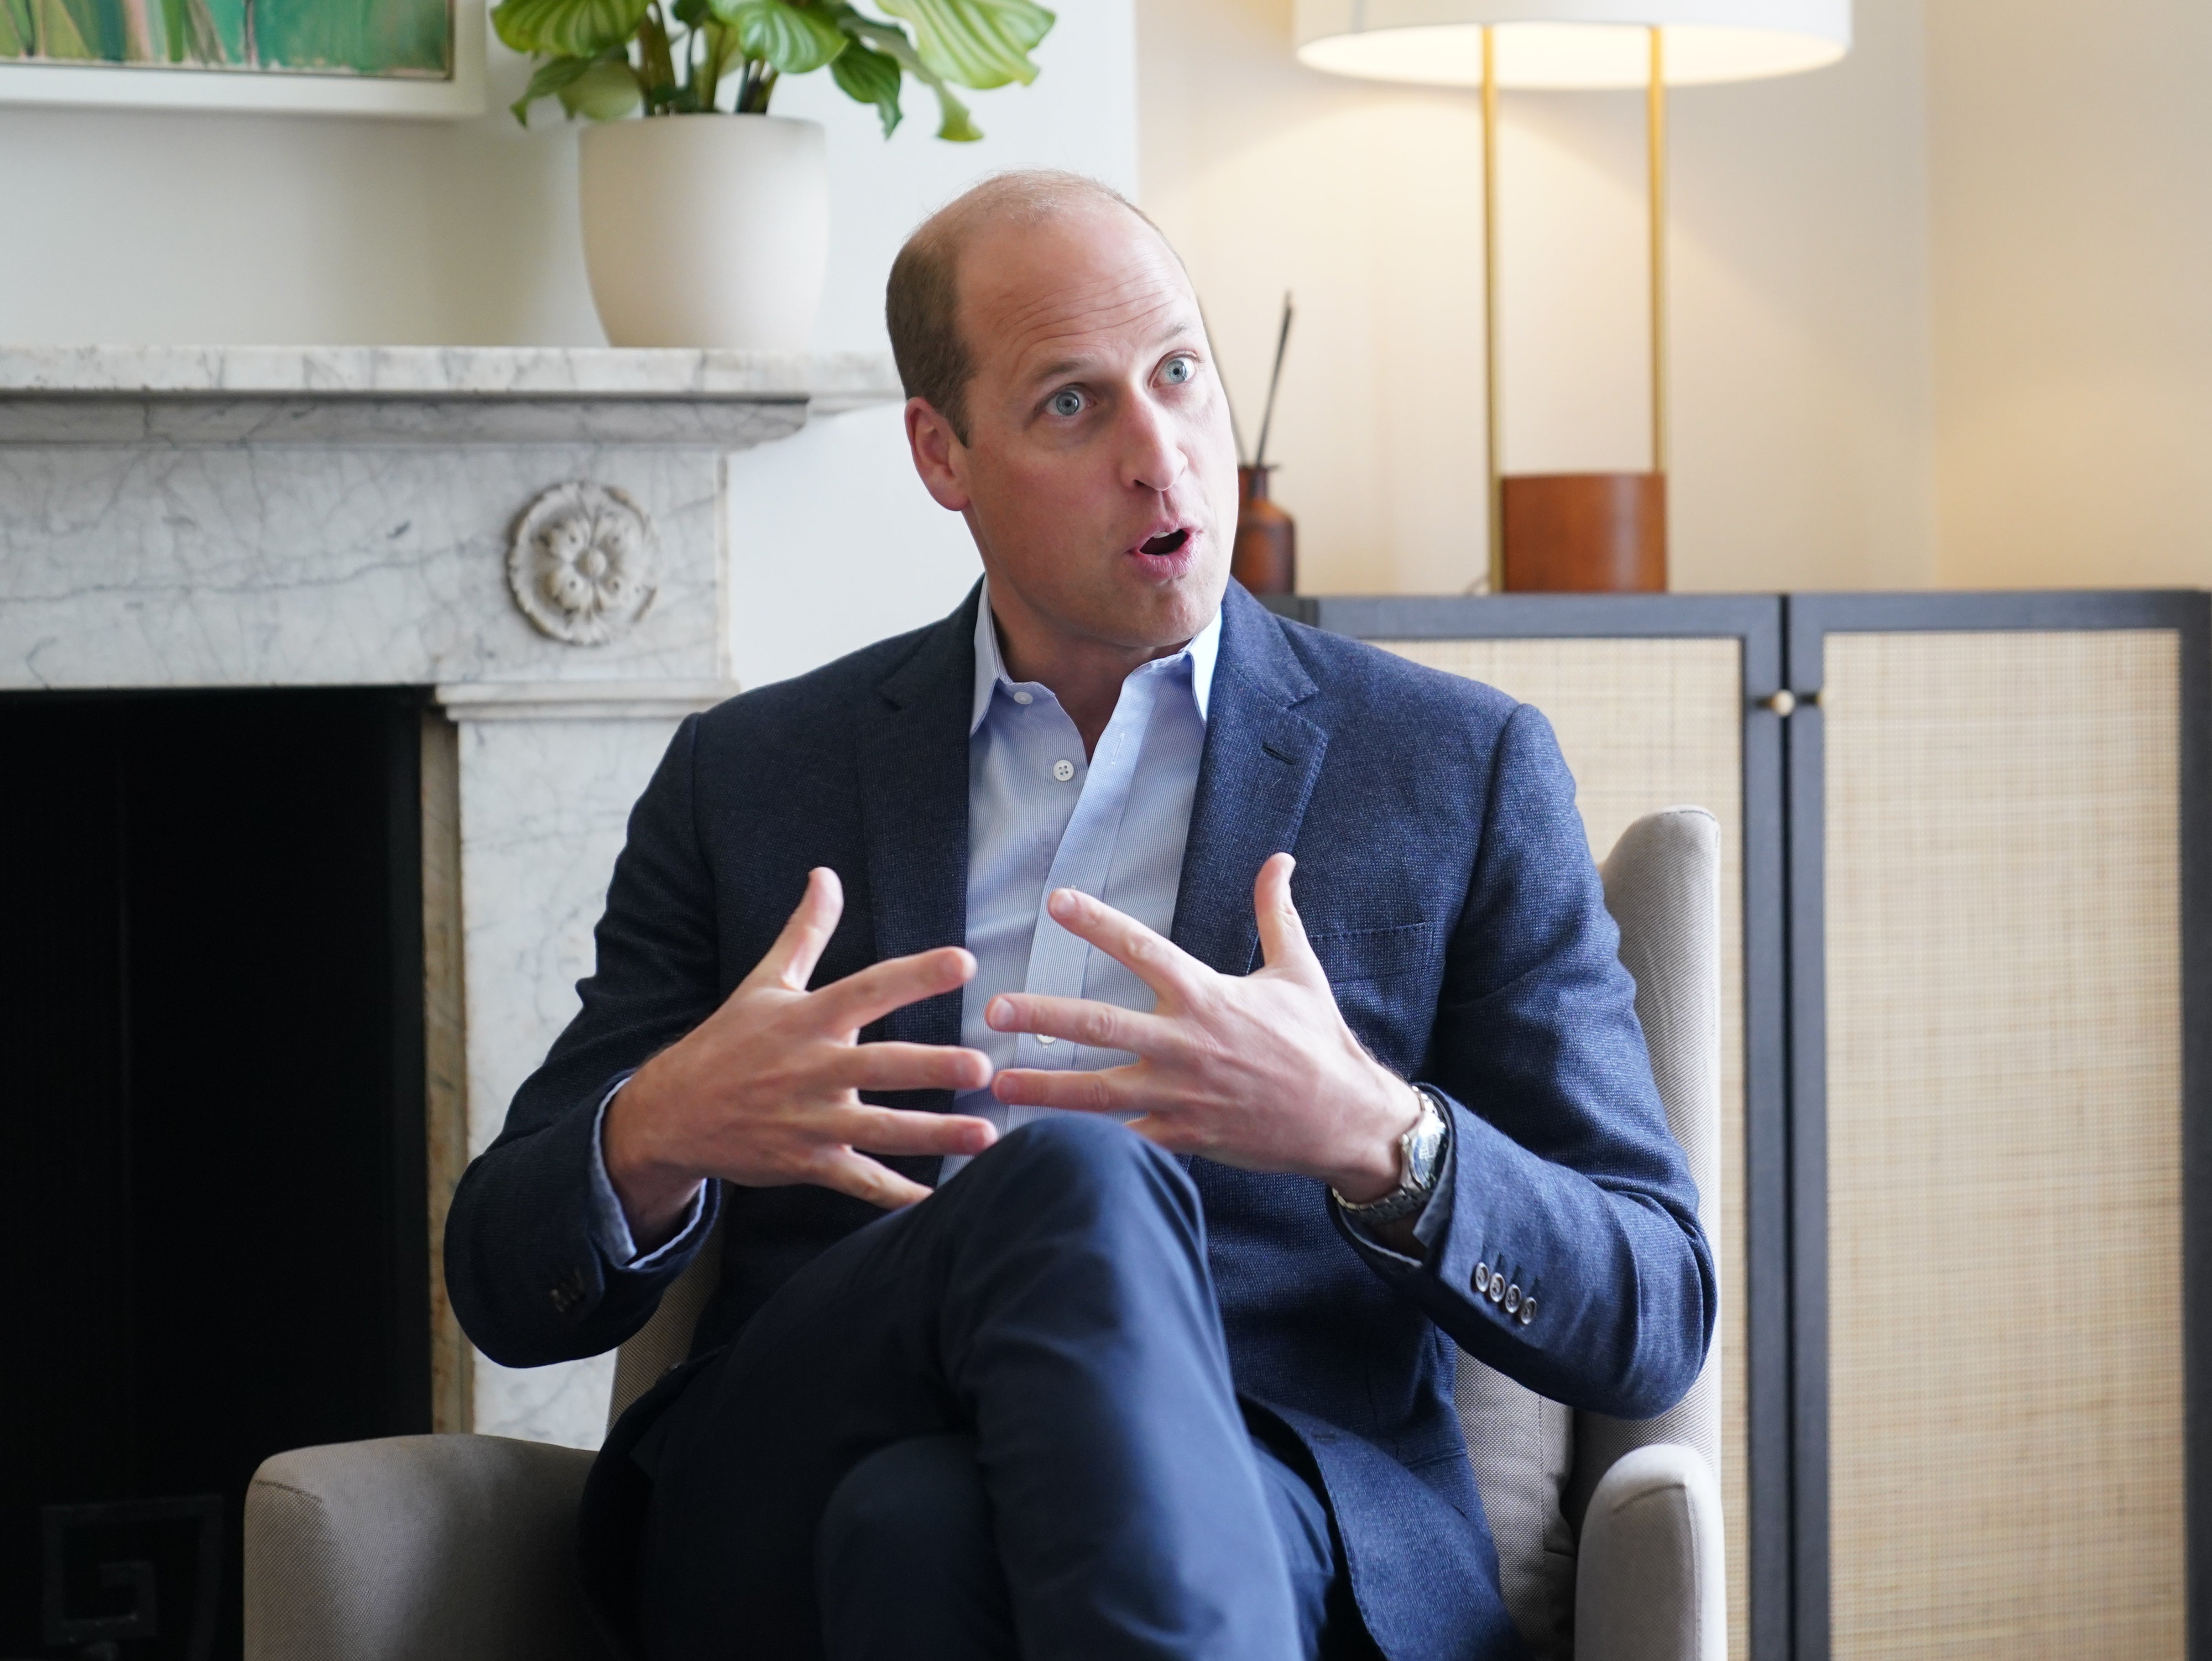 Prince William previously spoke of his own mental health struggles and PTSD.